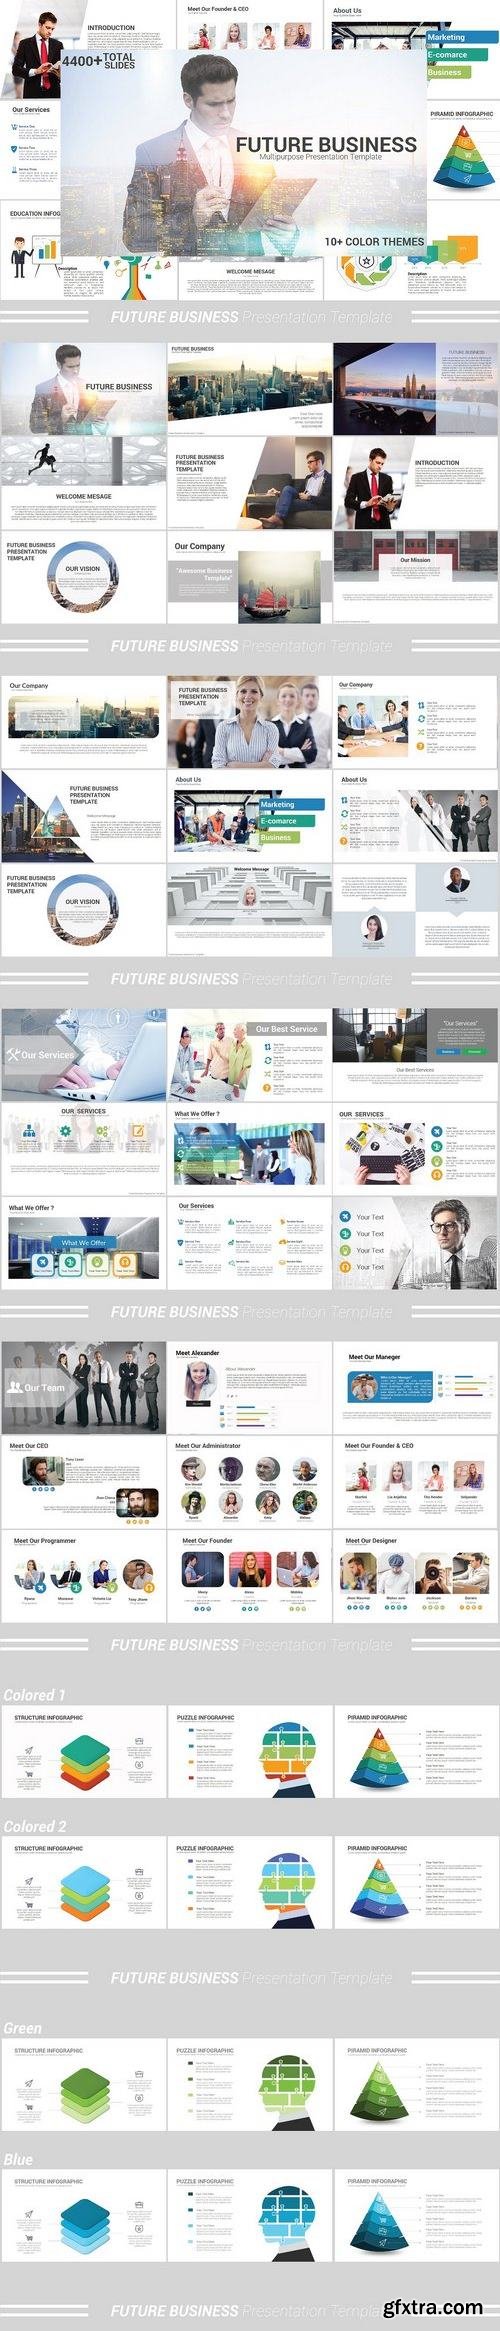 CM - Future Business Powerpoint Template 1484500